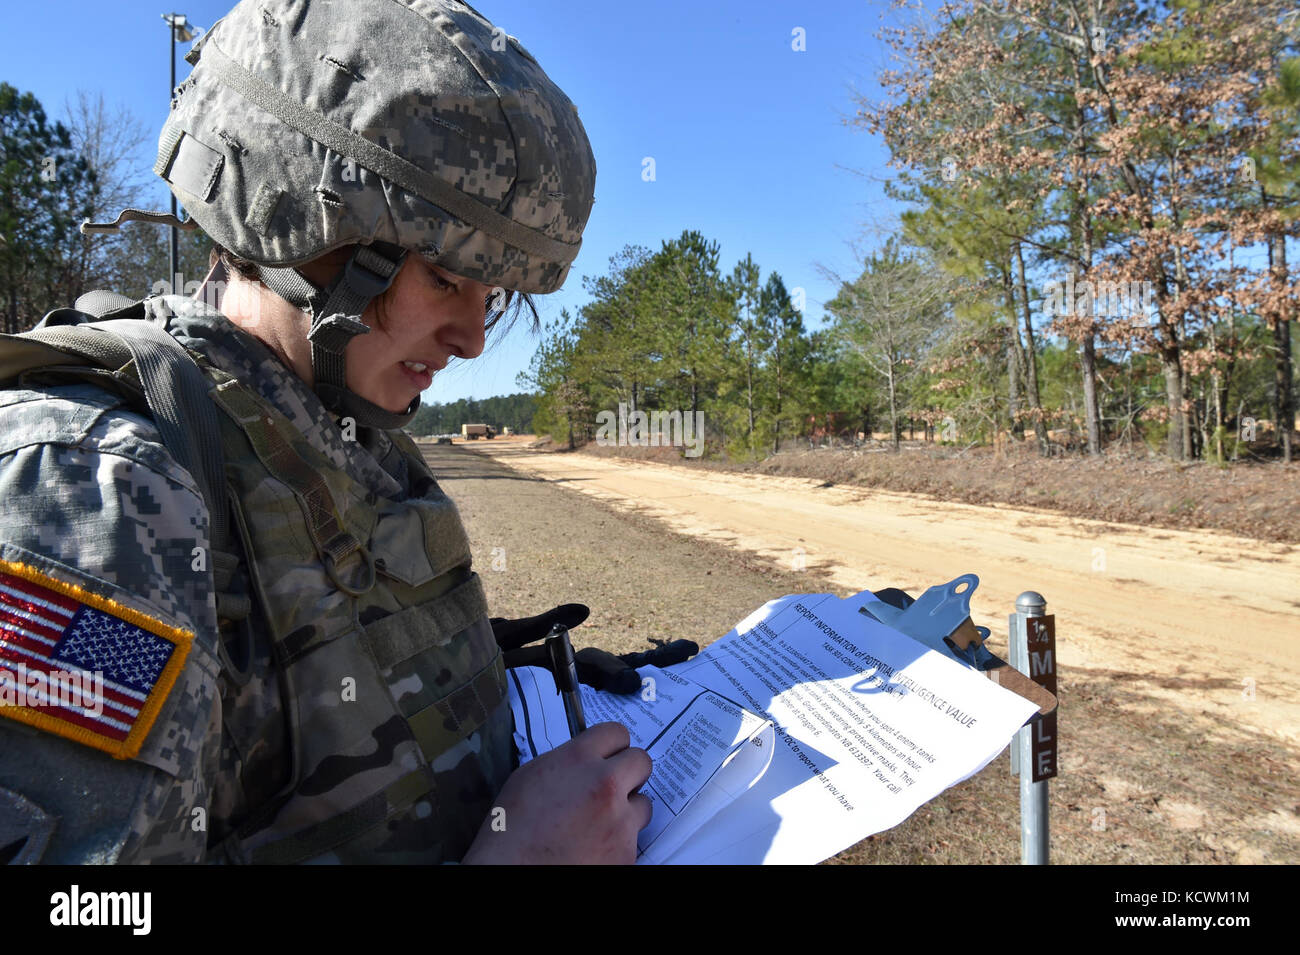 South Carolina Army National Guard Sgt. Rachel Clark, human resources non-commissioned officer with the 218th Leadership Regiment, completes a mystery challenge during the 2017 Best Warrior Competition at McCrady Training Center in Eastover, S.C., Jan 31, 2017. The Battle Challenge is a mobile obstacle course requiring participants to perform nine tasks under pressure of time, including a cargo net climb, a knotted rope descent, wall surmount, ammunition resupply, low crawl, gas can carry, marksmanship tasks, and a service member-down rescue. The event was open to all military service members, Stock Photo